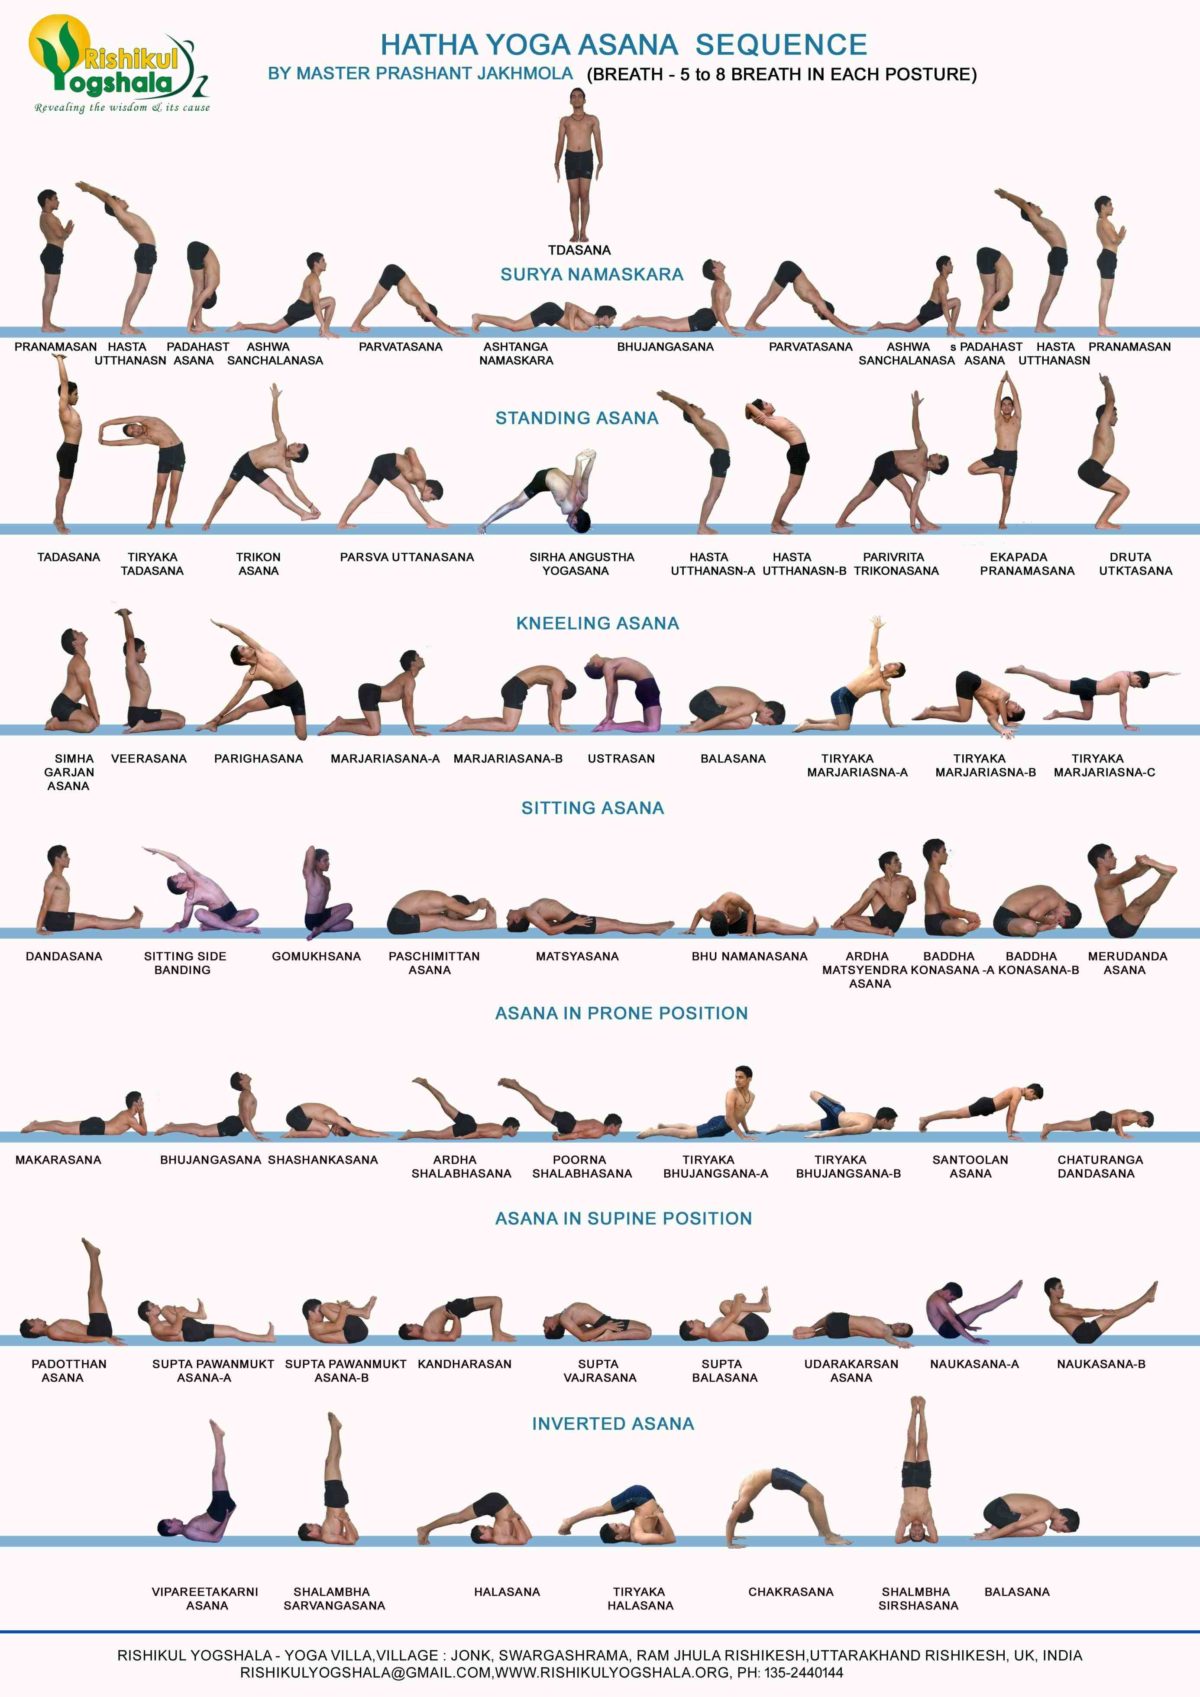 quick Hatha Yoga Poses Pictures overview of a vinyasa yoga sequence